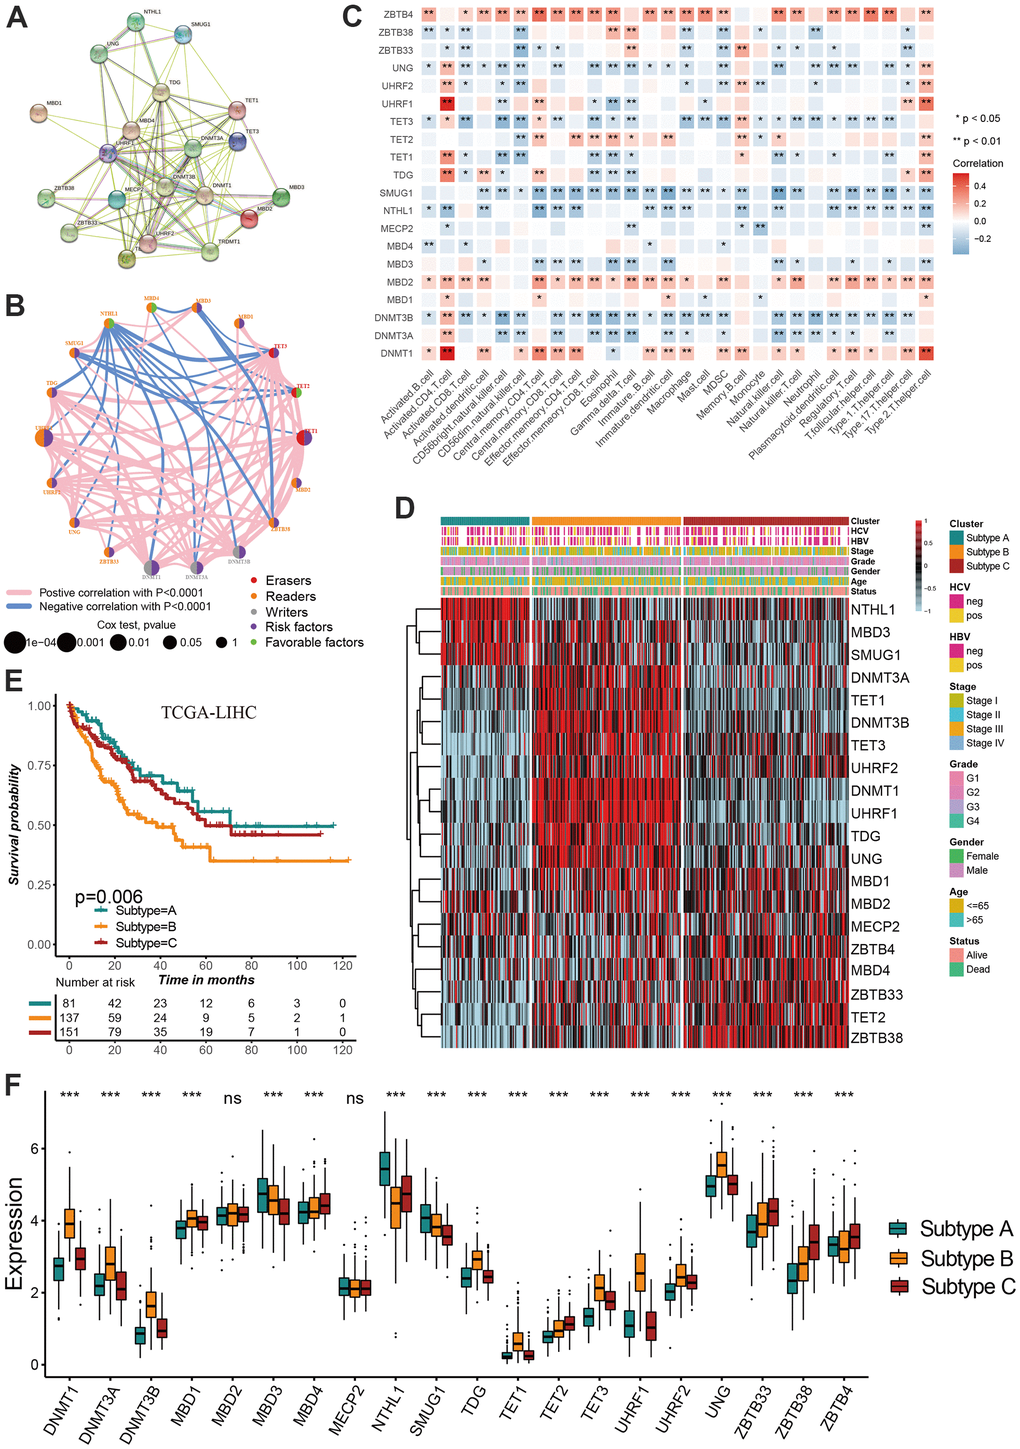 Identification of DNA methylation regulator-related molecular subtypes in hepatocellular carcinoma. (A) The protein-protein interactions (PPI) network between DNA methylation regulators using STRING database. (B) A network was used to visualize the prognostic significance and expression correlation among these regulators. (C) The correlation between DNA methylation regulator expression and immune cell infiltration levels. (D) The hierarchical clustering of 20 DNA methylation regulators among three molecular subtypes. (E) Survival analyses for three distinct DNA methylation regulator-related molecular subtypes. (F) DNA methylation regulators expressed in the three molecular subtypes. All data analyses were based on the TCGA-LIHC cohort. Neg, negative; Pos, positive; Ns, not significant. *P 